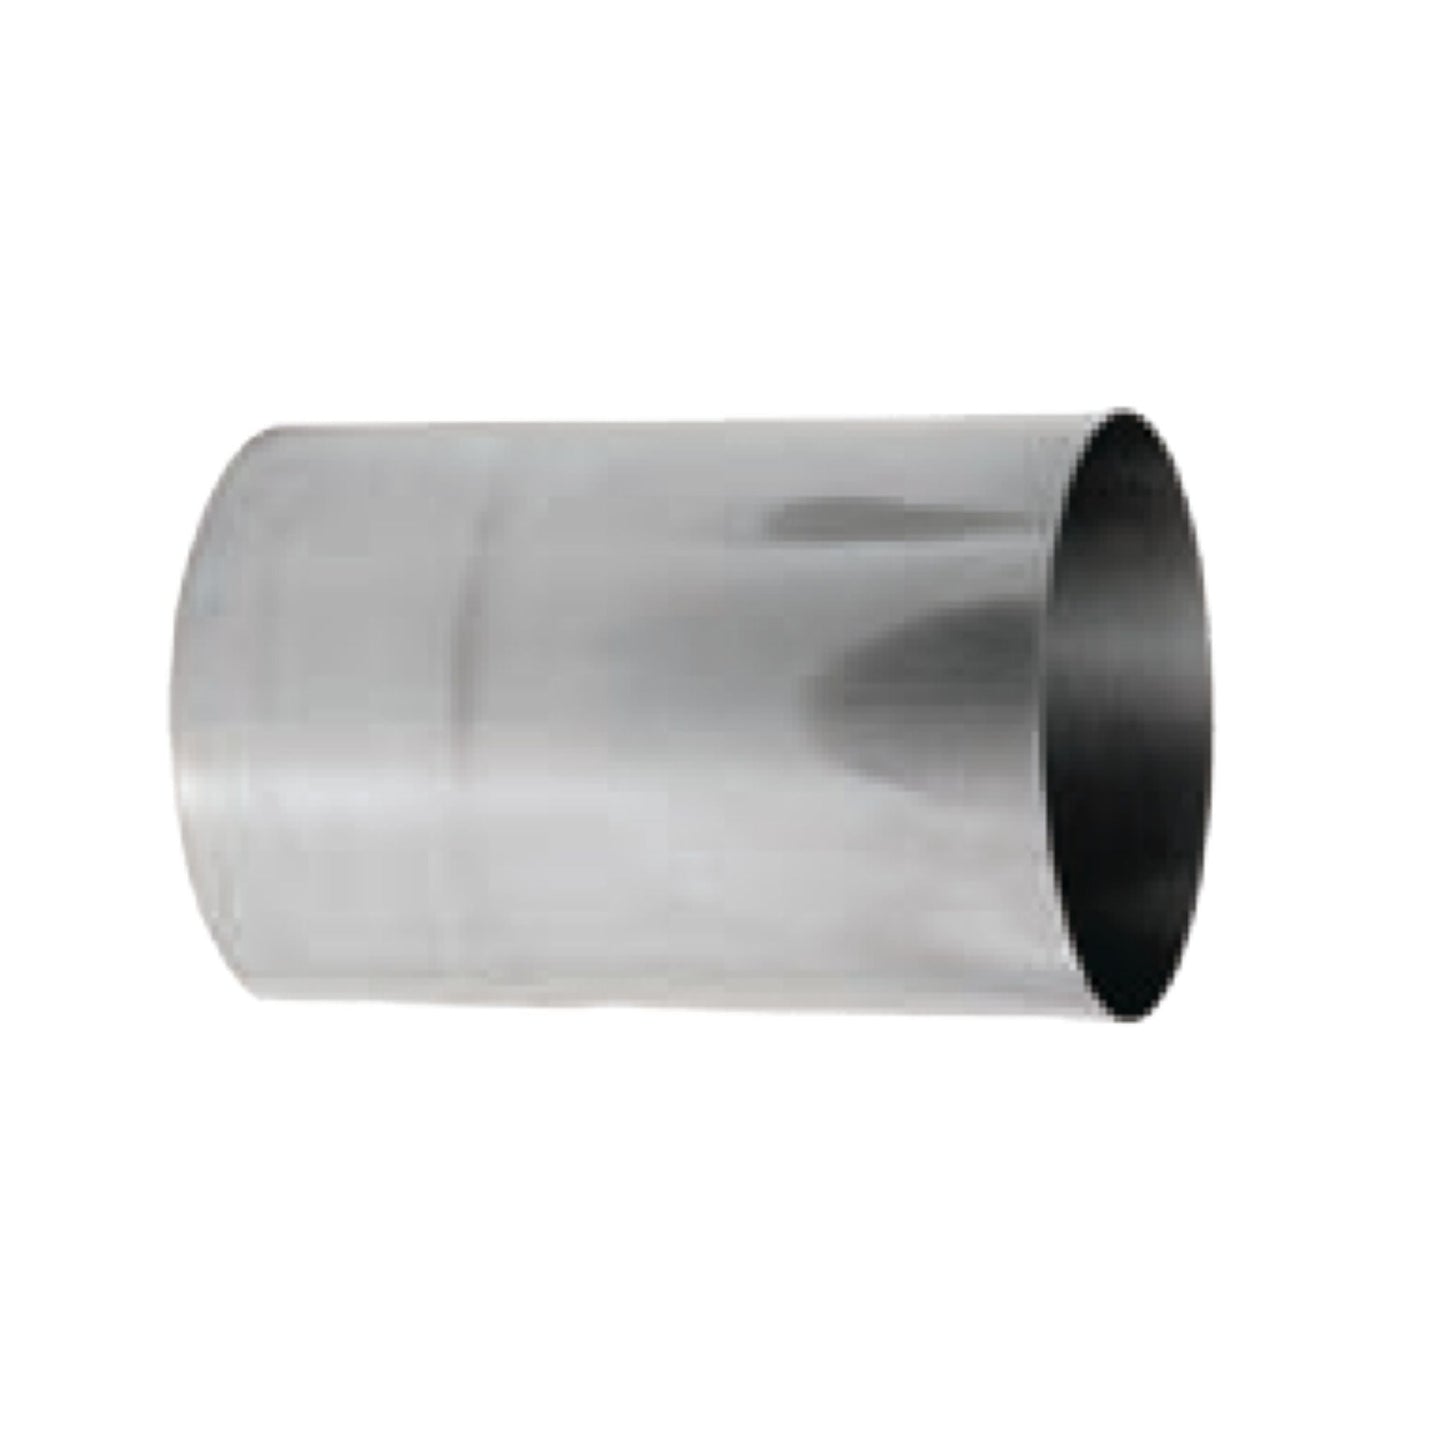 DuraVent FasNSeal 7" 29-4C Stainless Steel Wall Thimble Sleeve Extension